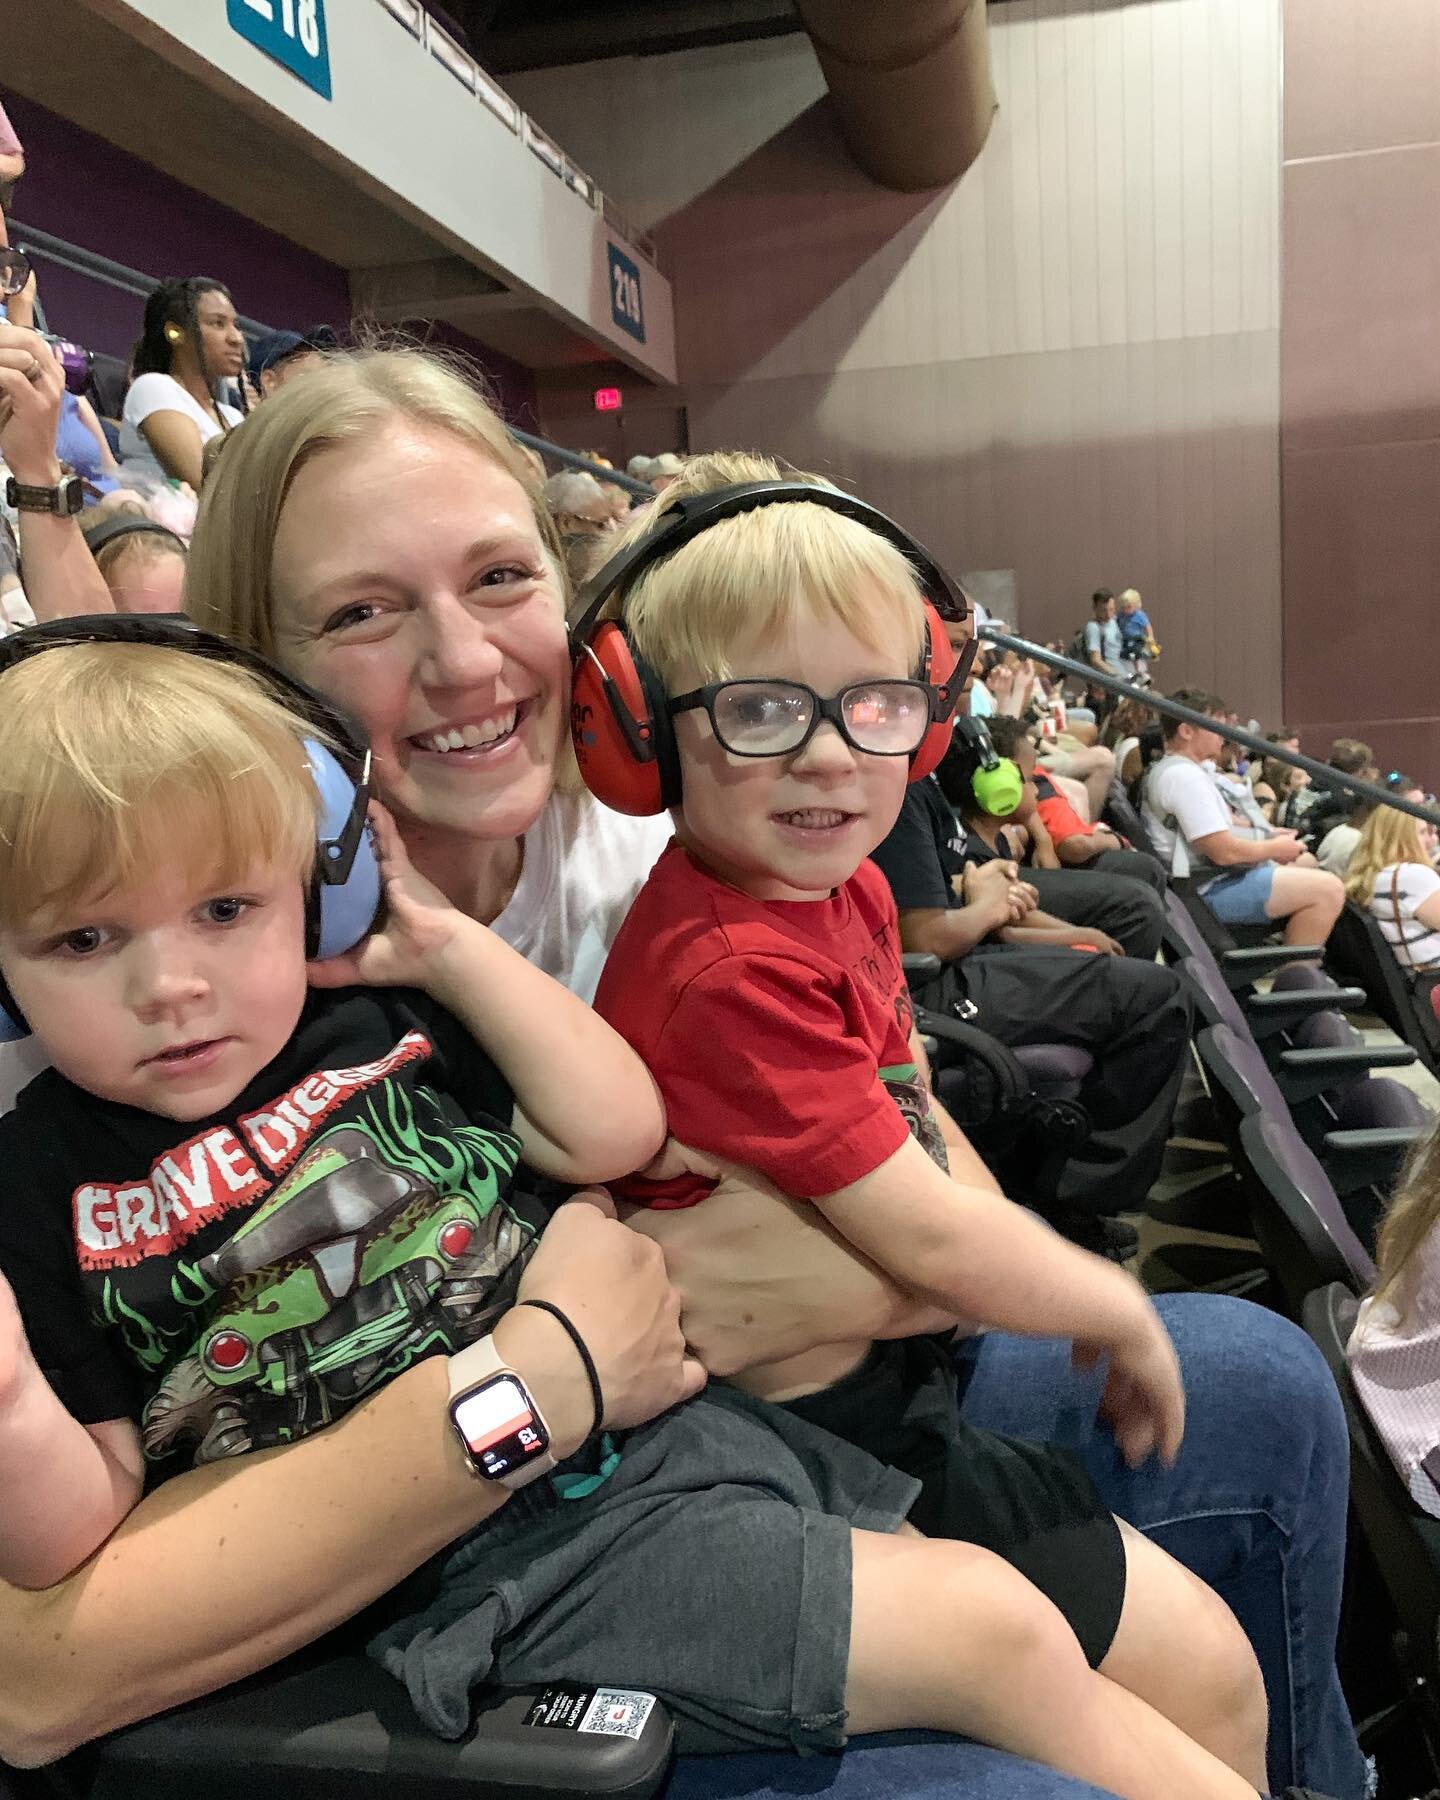 One of my favorite parts of motherhood is seeing unhindered joy and excitement in the eyes of my boys 💙💙

So Monster Jam and the beach it was for Mother&rsquo;s Day Weekend 🫶🏻

#mothersday #boymama @monsterjam